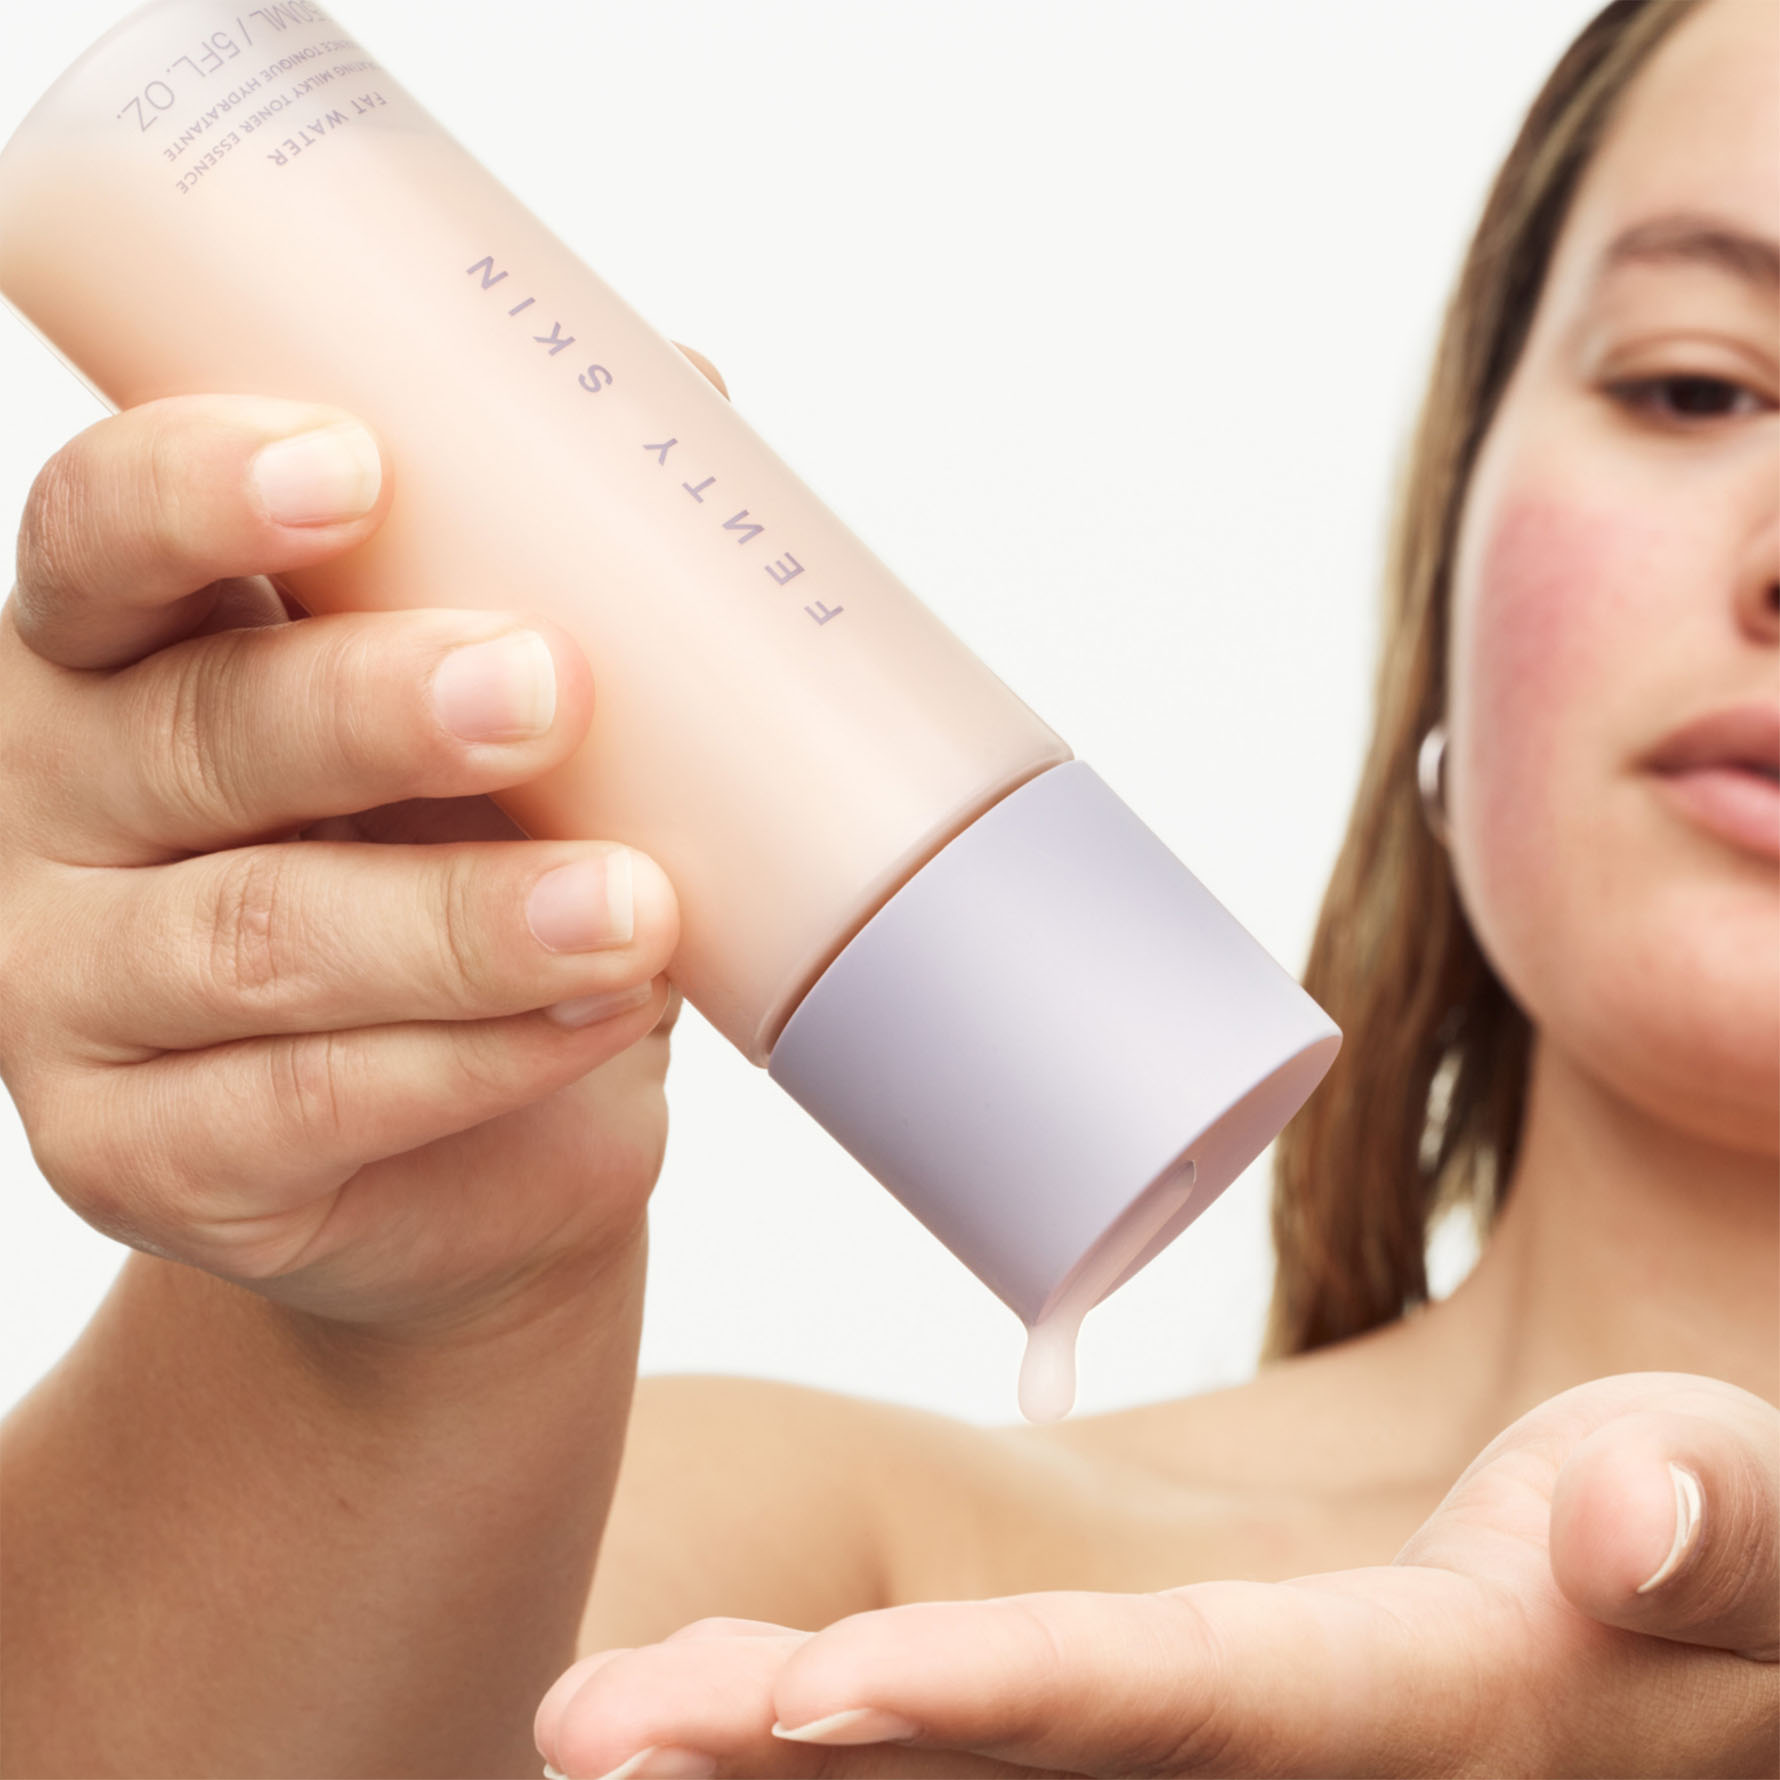 Model squeezing Fat Water Milky Toner Essence into hands,